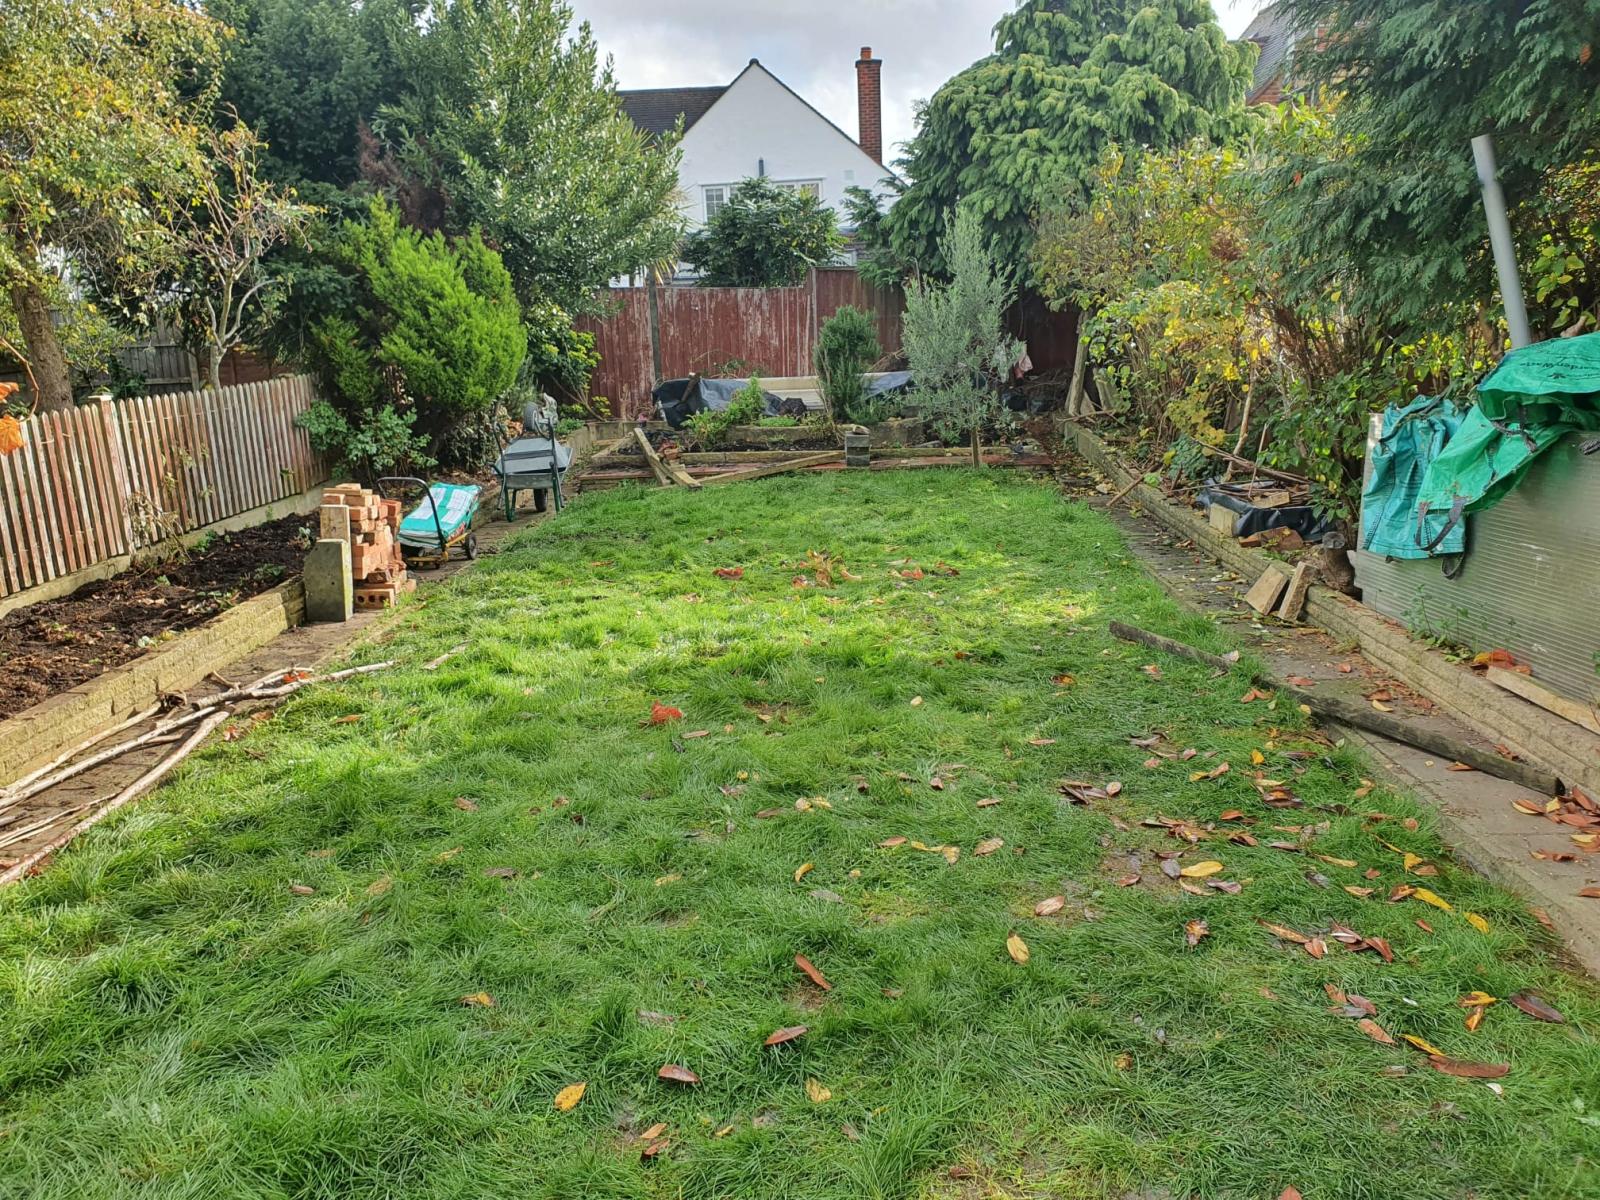 Professional Garden Cleanup London by Happy Services London